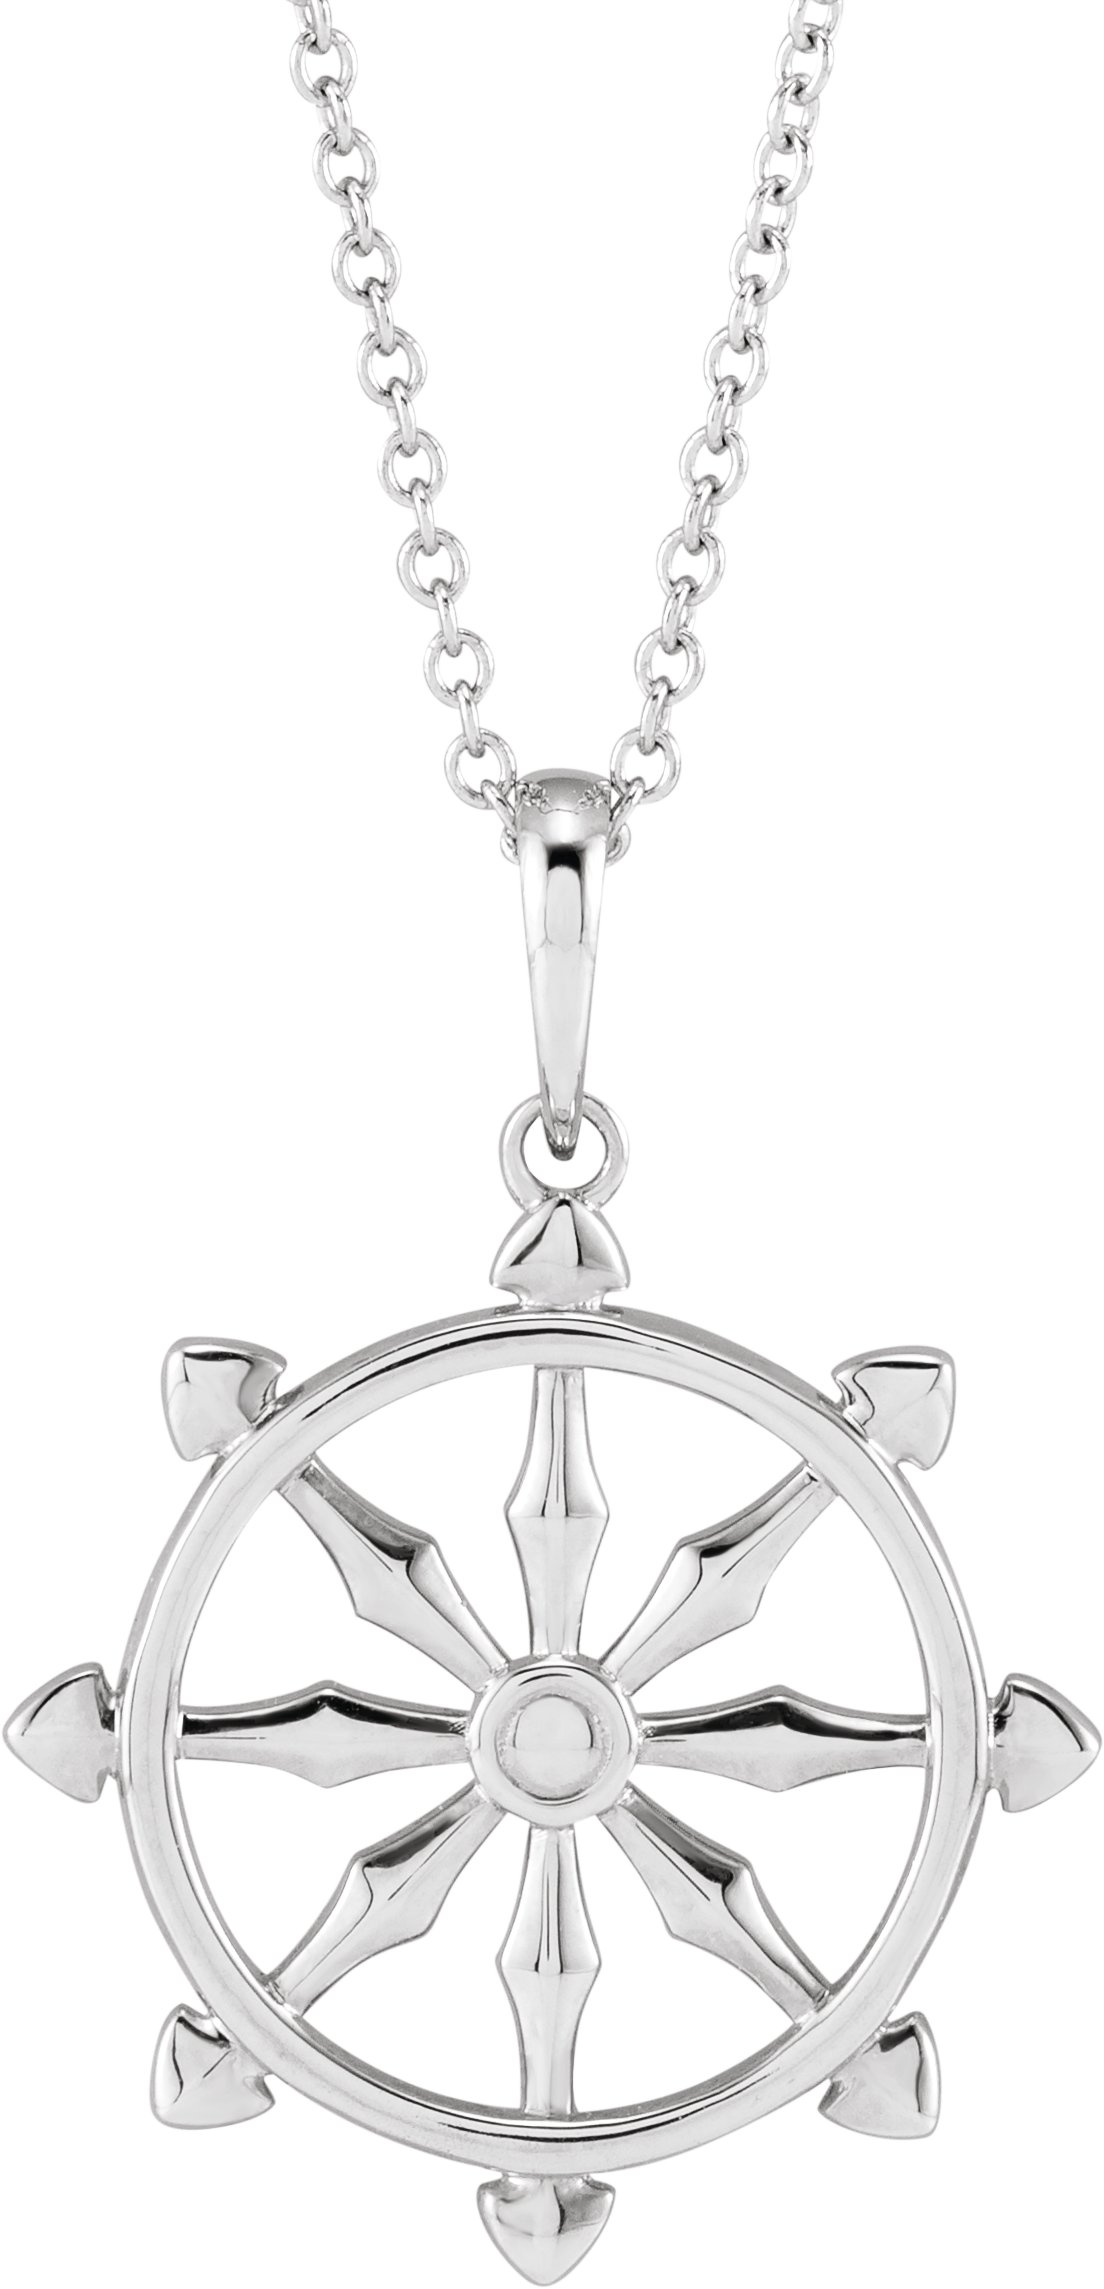 Sterling Silver Dharmachakra Wheel 16-18" Necklace